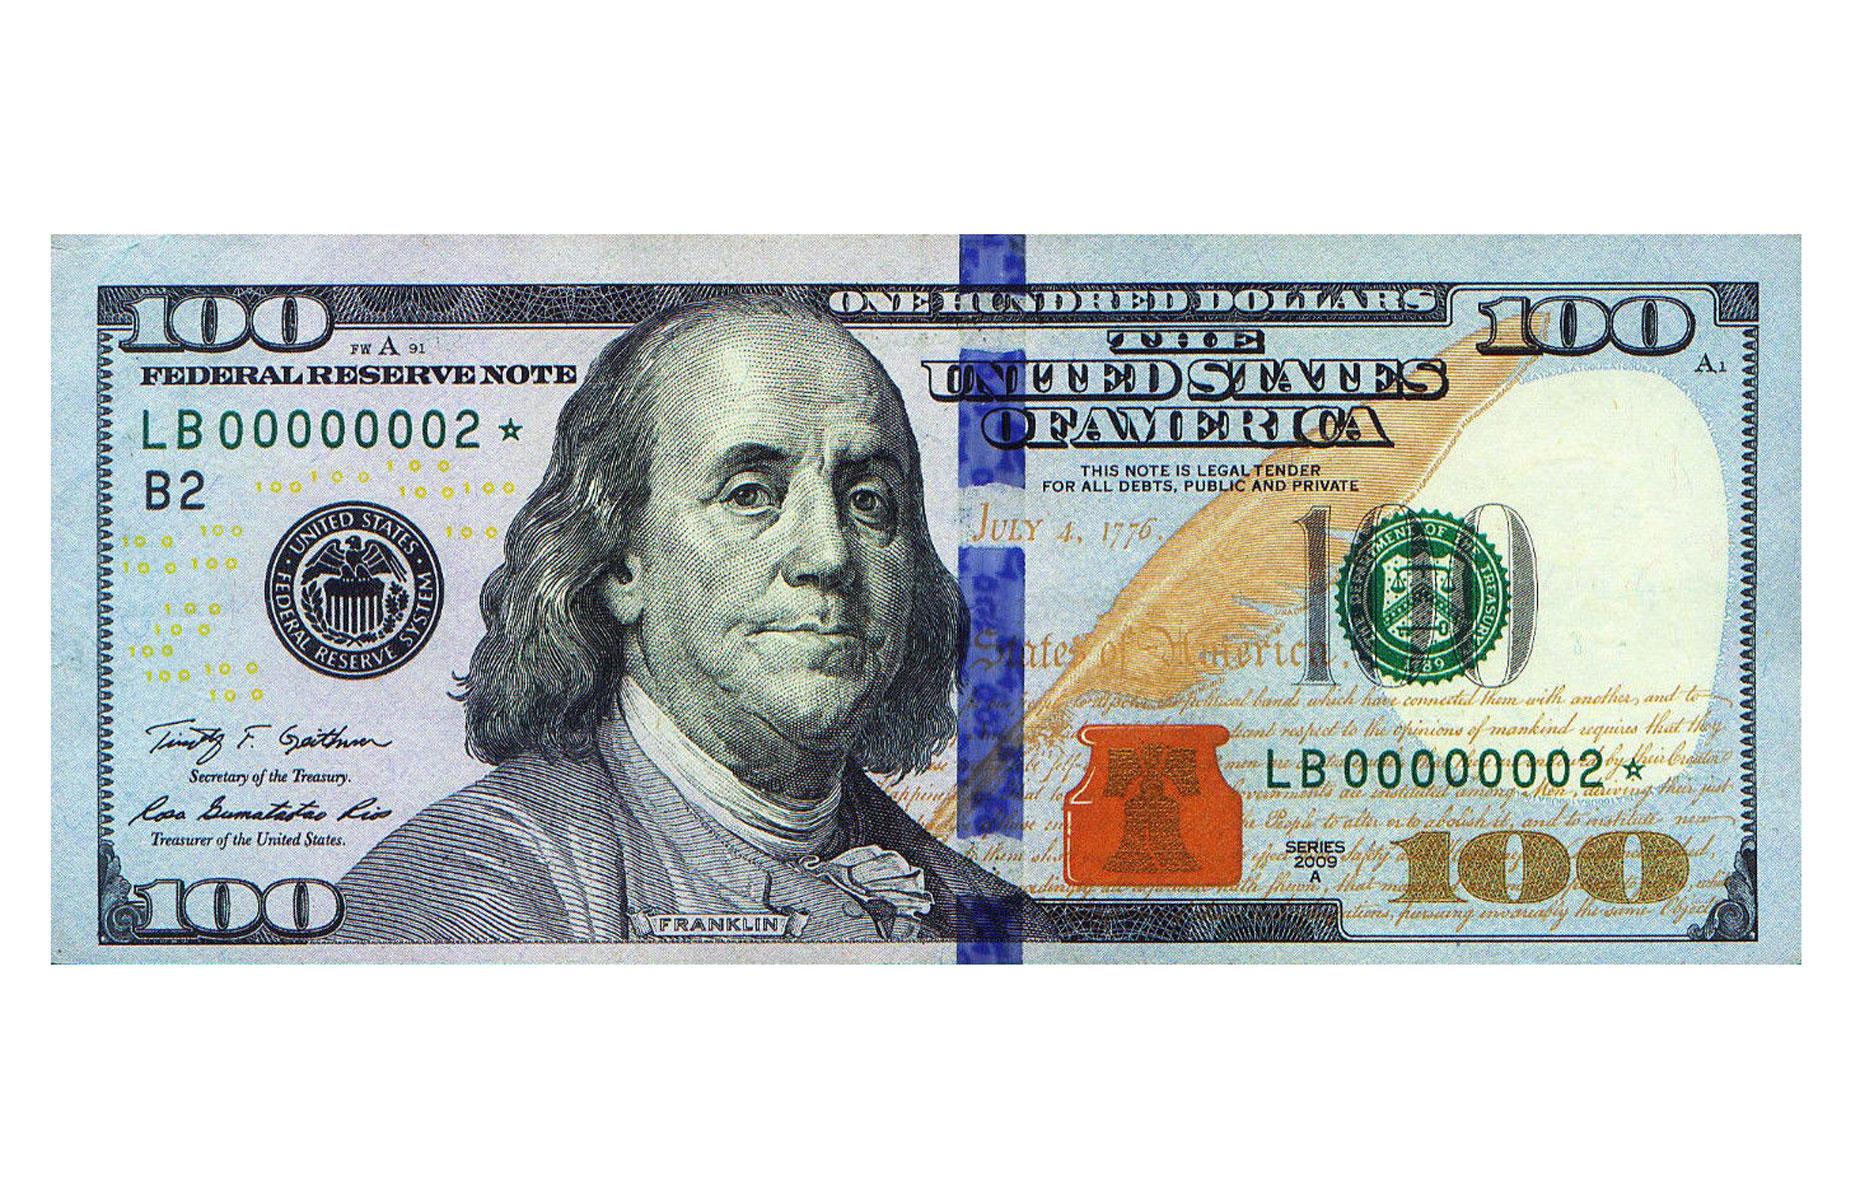 Low serial number bills: up to $15,000